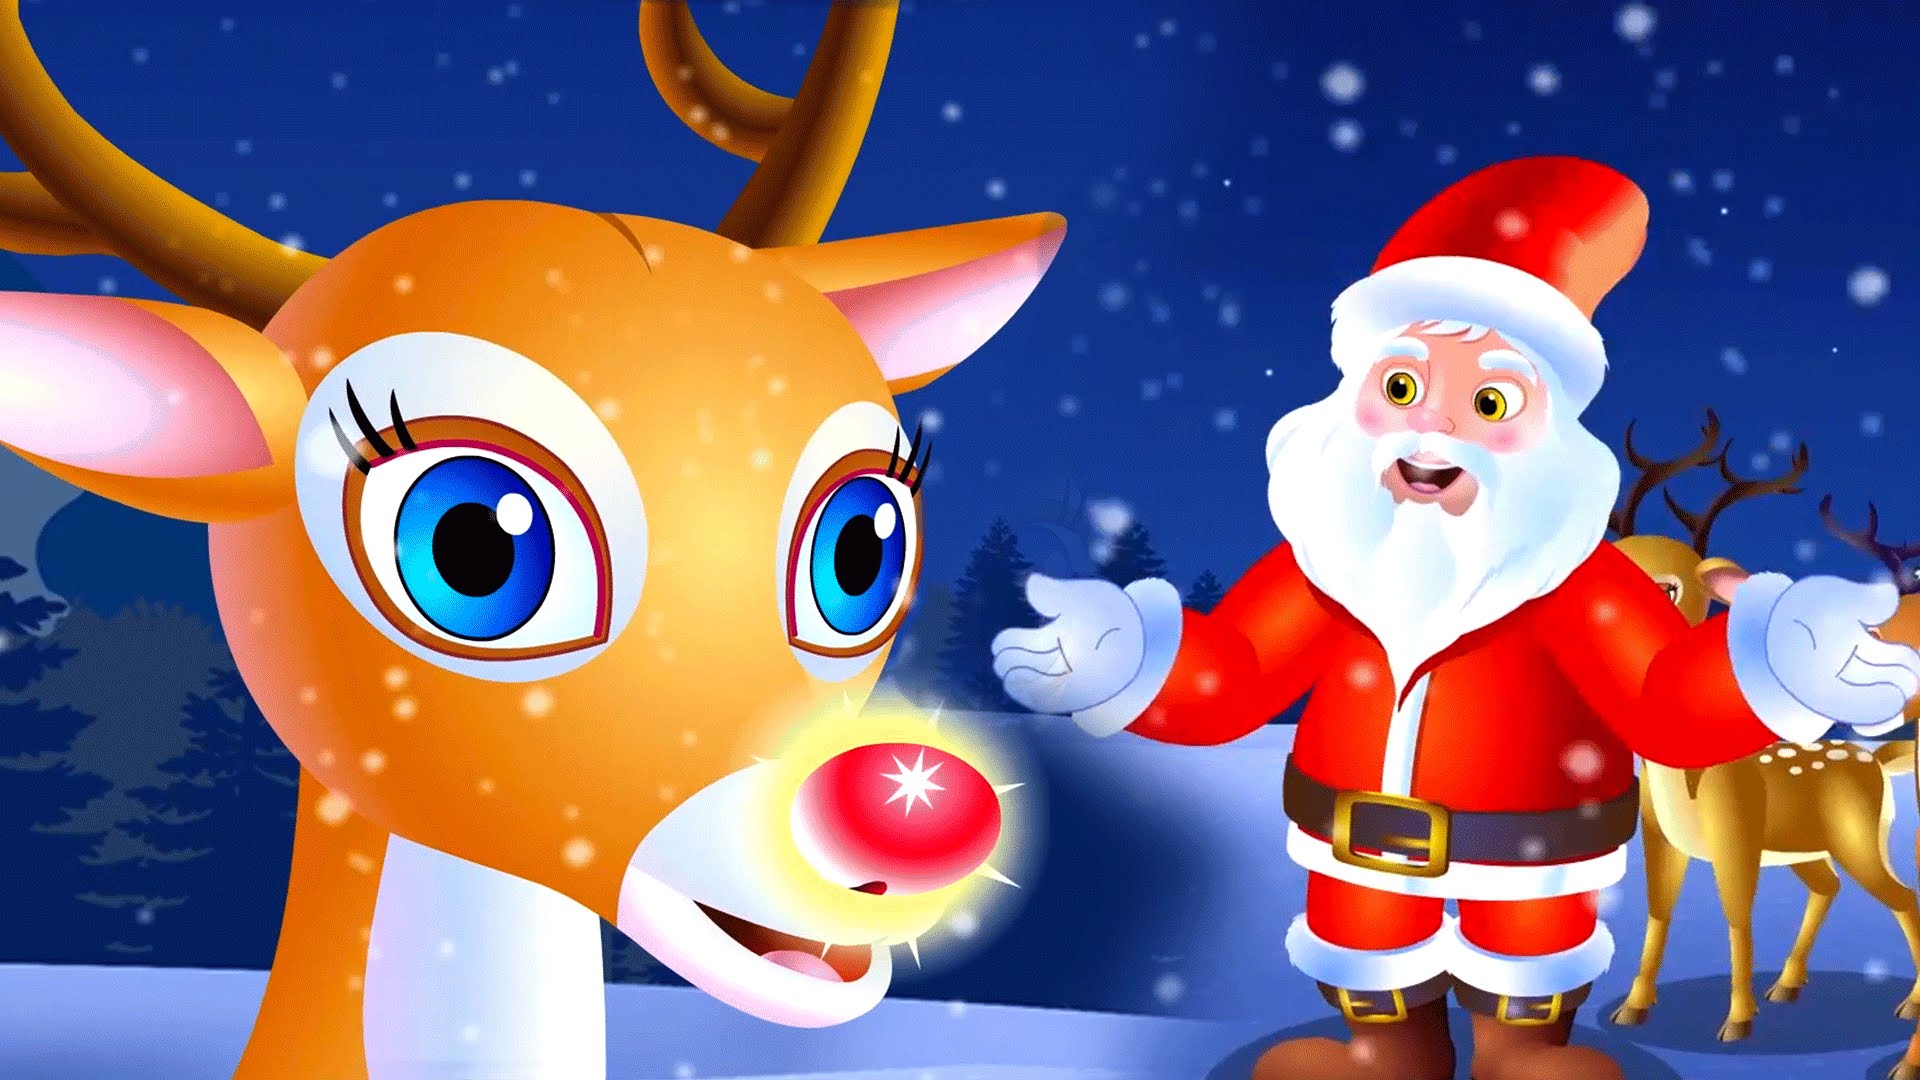 Santa Claus With Reindeer Wallpaper - Rudolph The Red Nosed Reindeer For Christmas , HD Wallpaper & Backgrounds